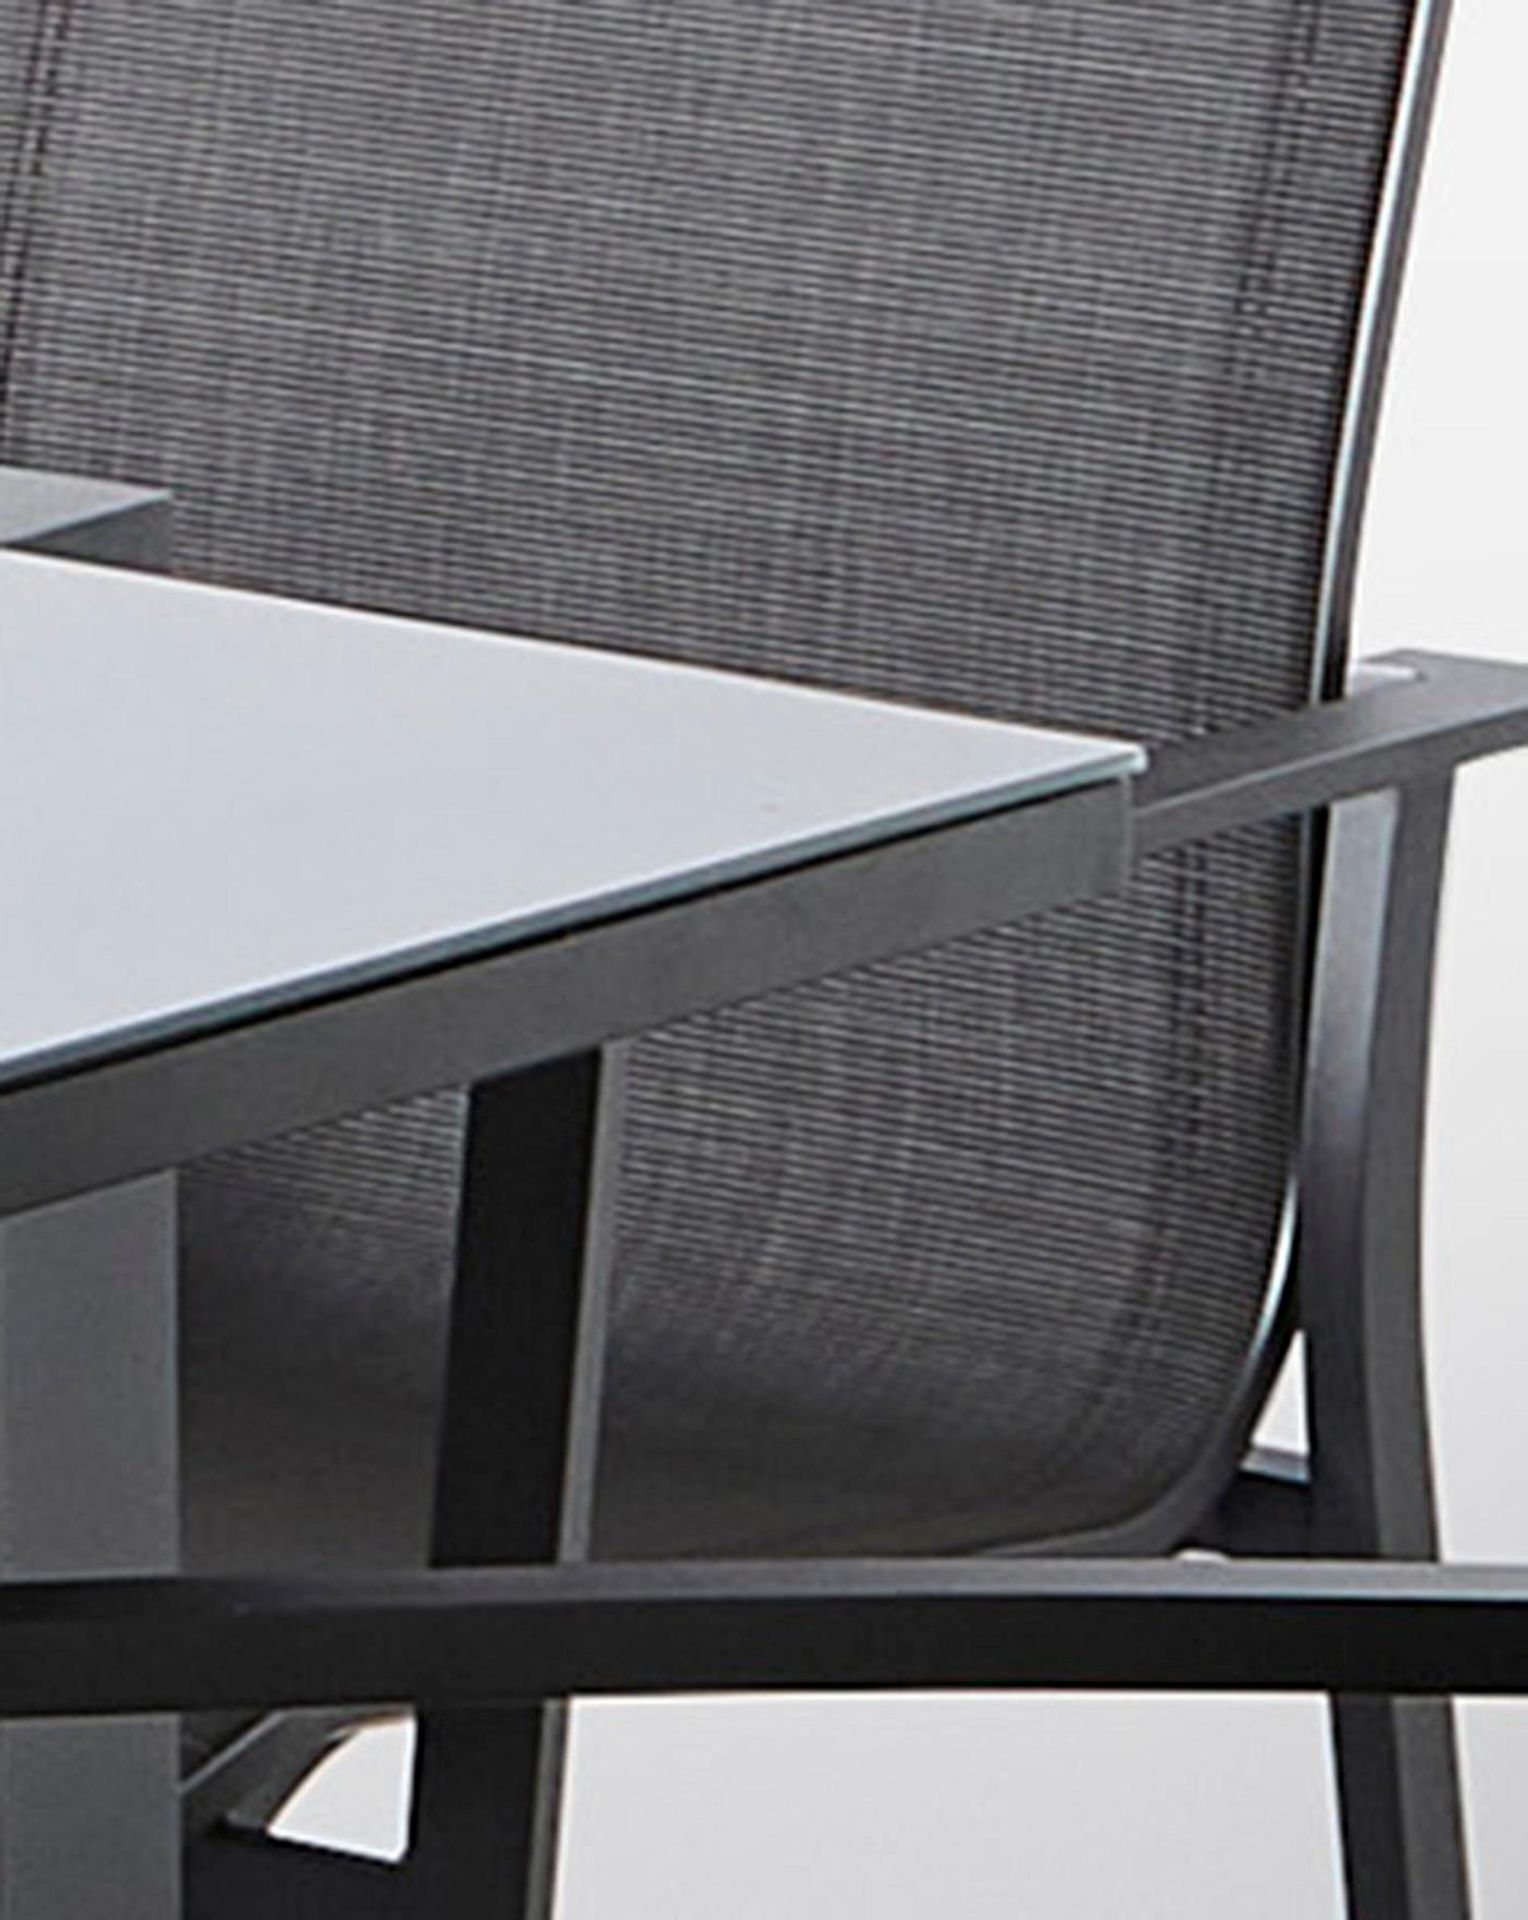 BRAND NEW Oslo 6 Seater Dining Set with Extendable Table. RRP £699 EACH. The Oslo Dining Set with - Image 4 of 4